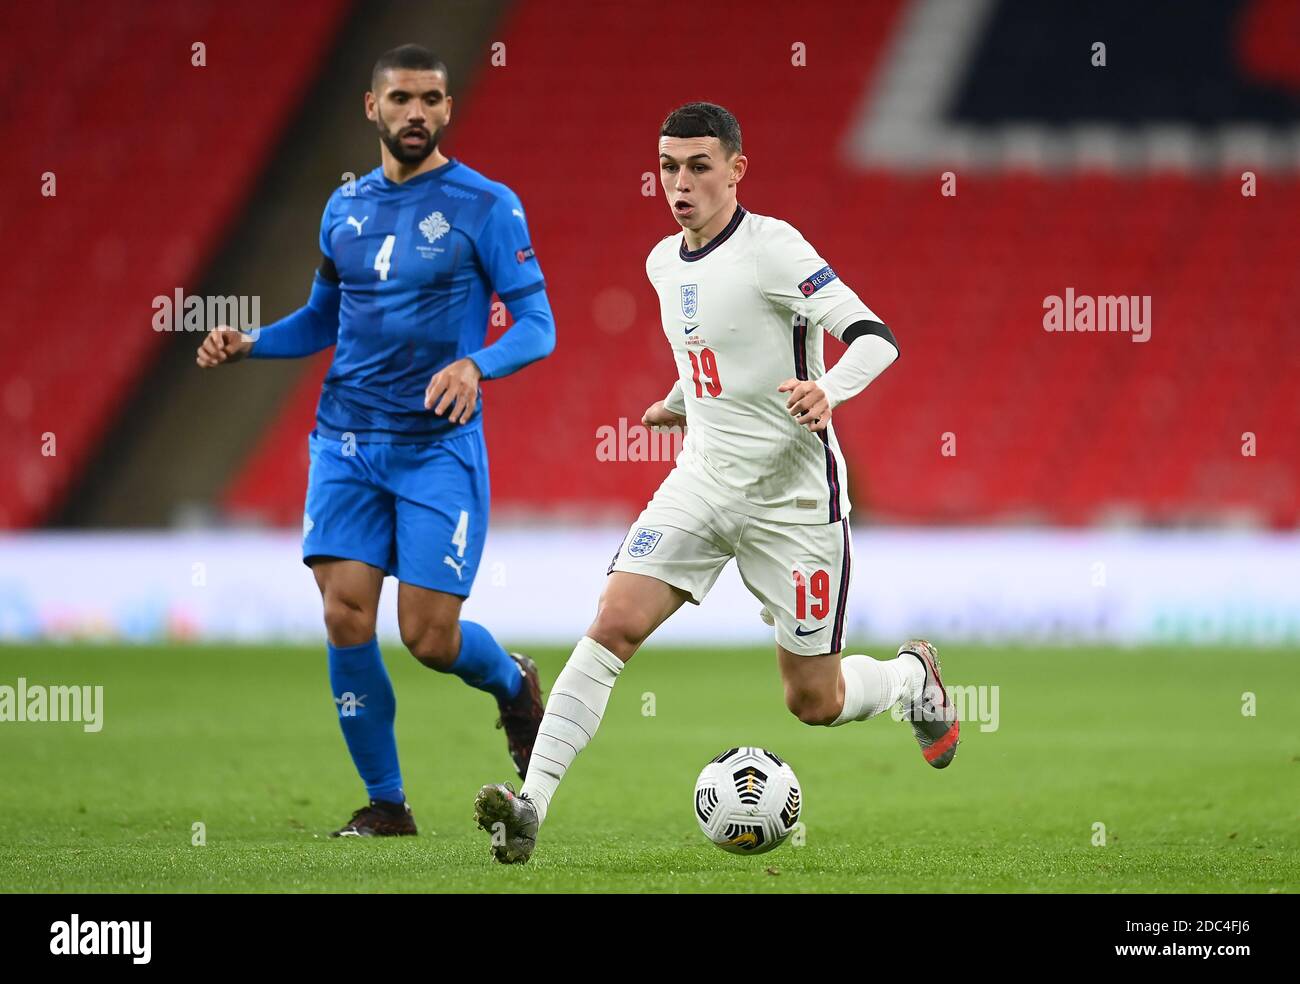 Iceland's Victor Palsson (left) and England's Phil Foden in action during the UEFA Nations League match at Wembley Stadium, London. Stock Photo